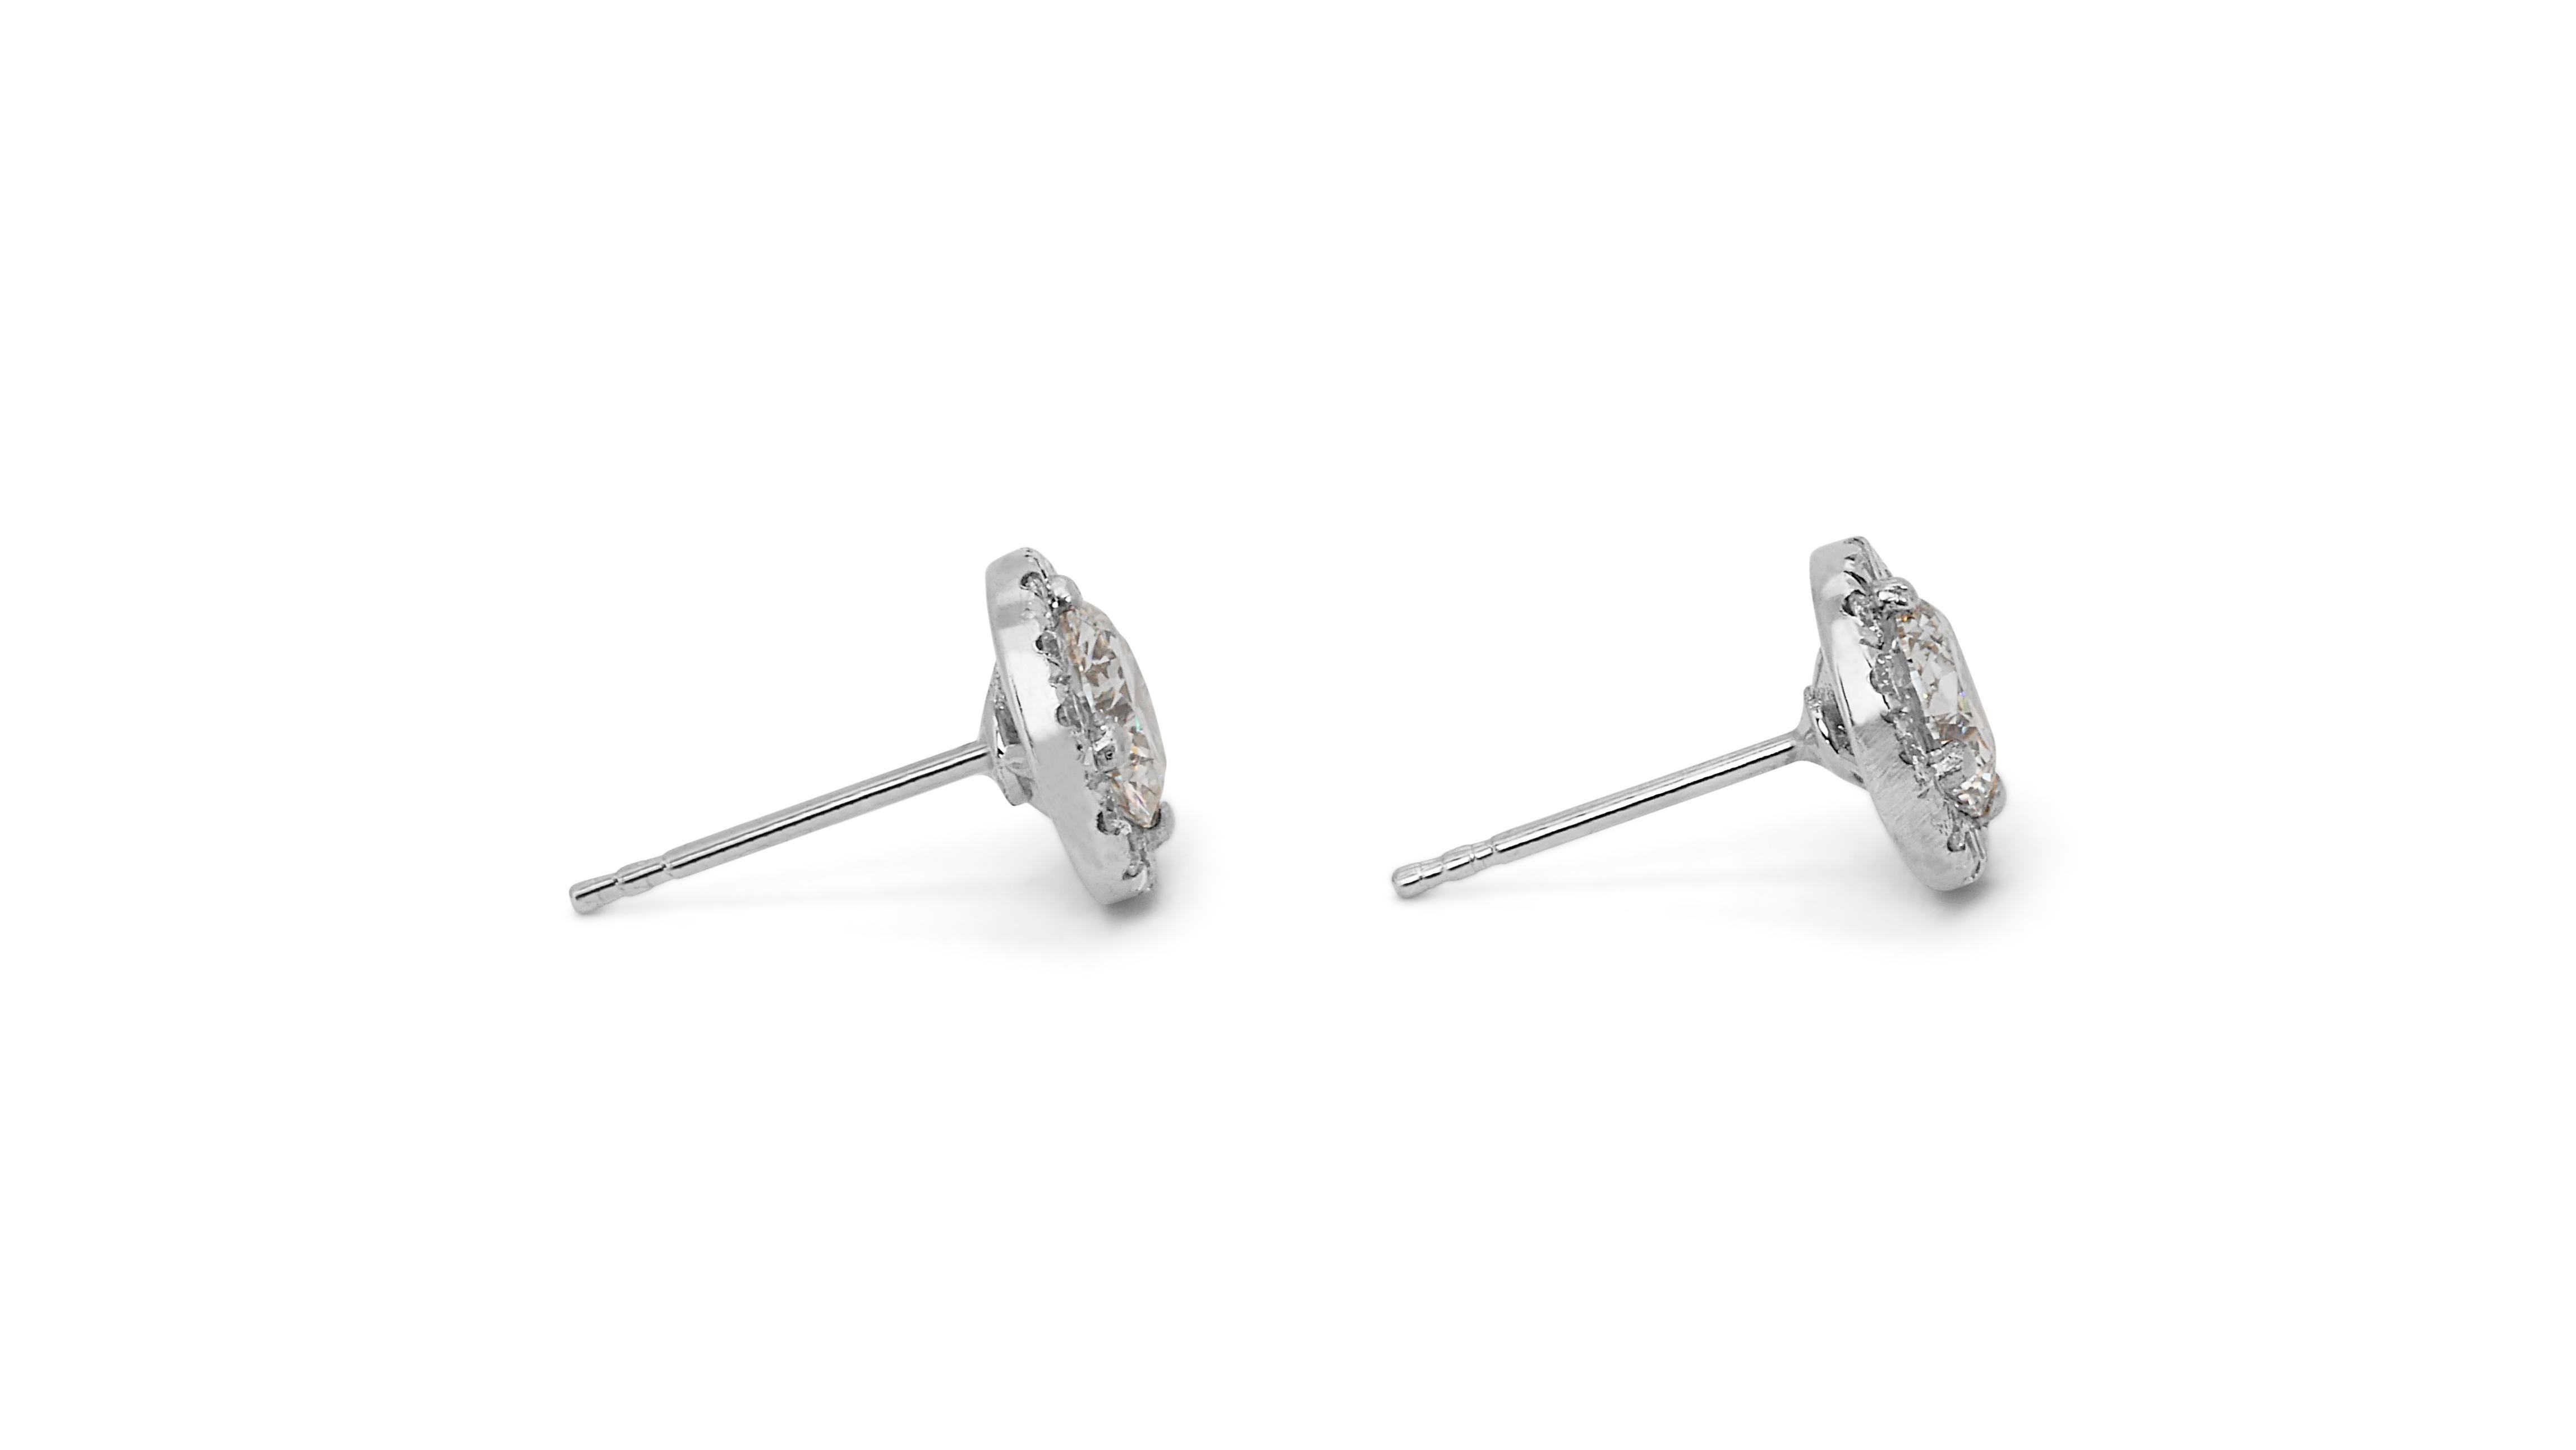 Fascinating 2.55ct Diamond Halo Earrings in 18k White Gold - GIA Certified For Sale 3